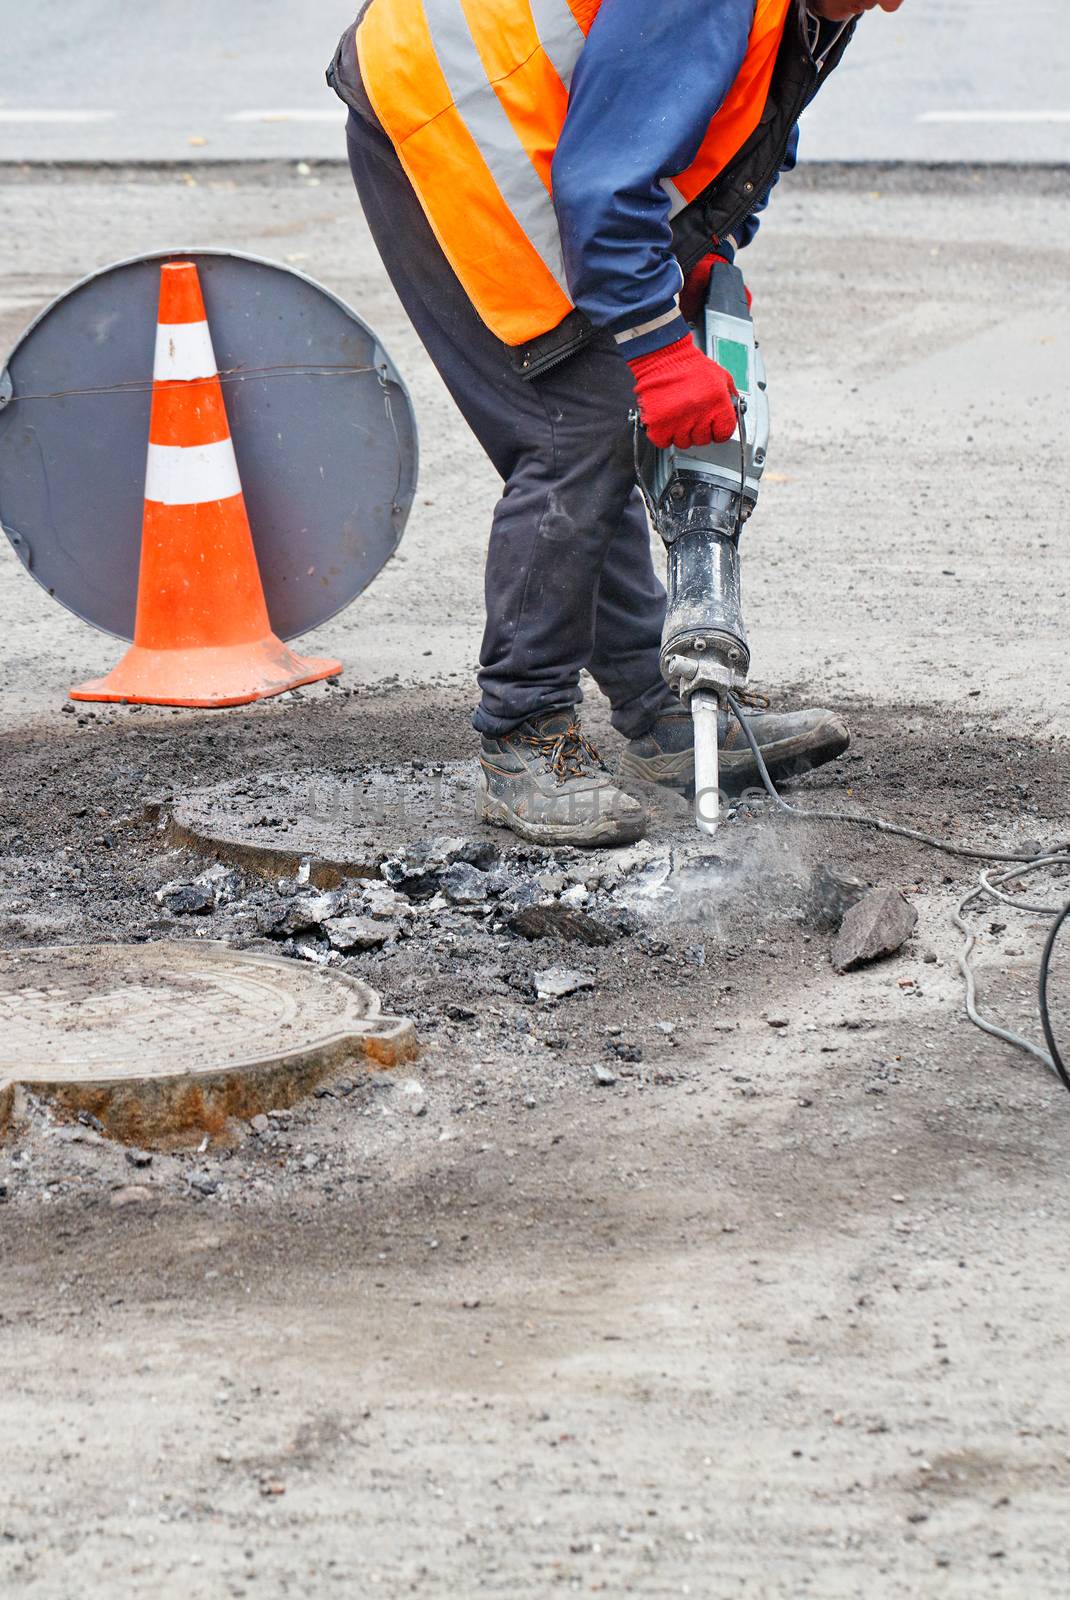 A road worker, dressed in reflective clothing, repairs a section of road near sewers with an electric jackhammer, vertical image, copy space.